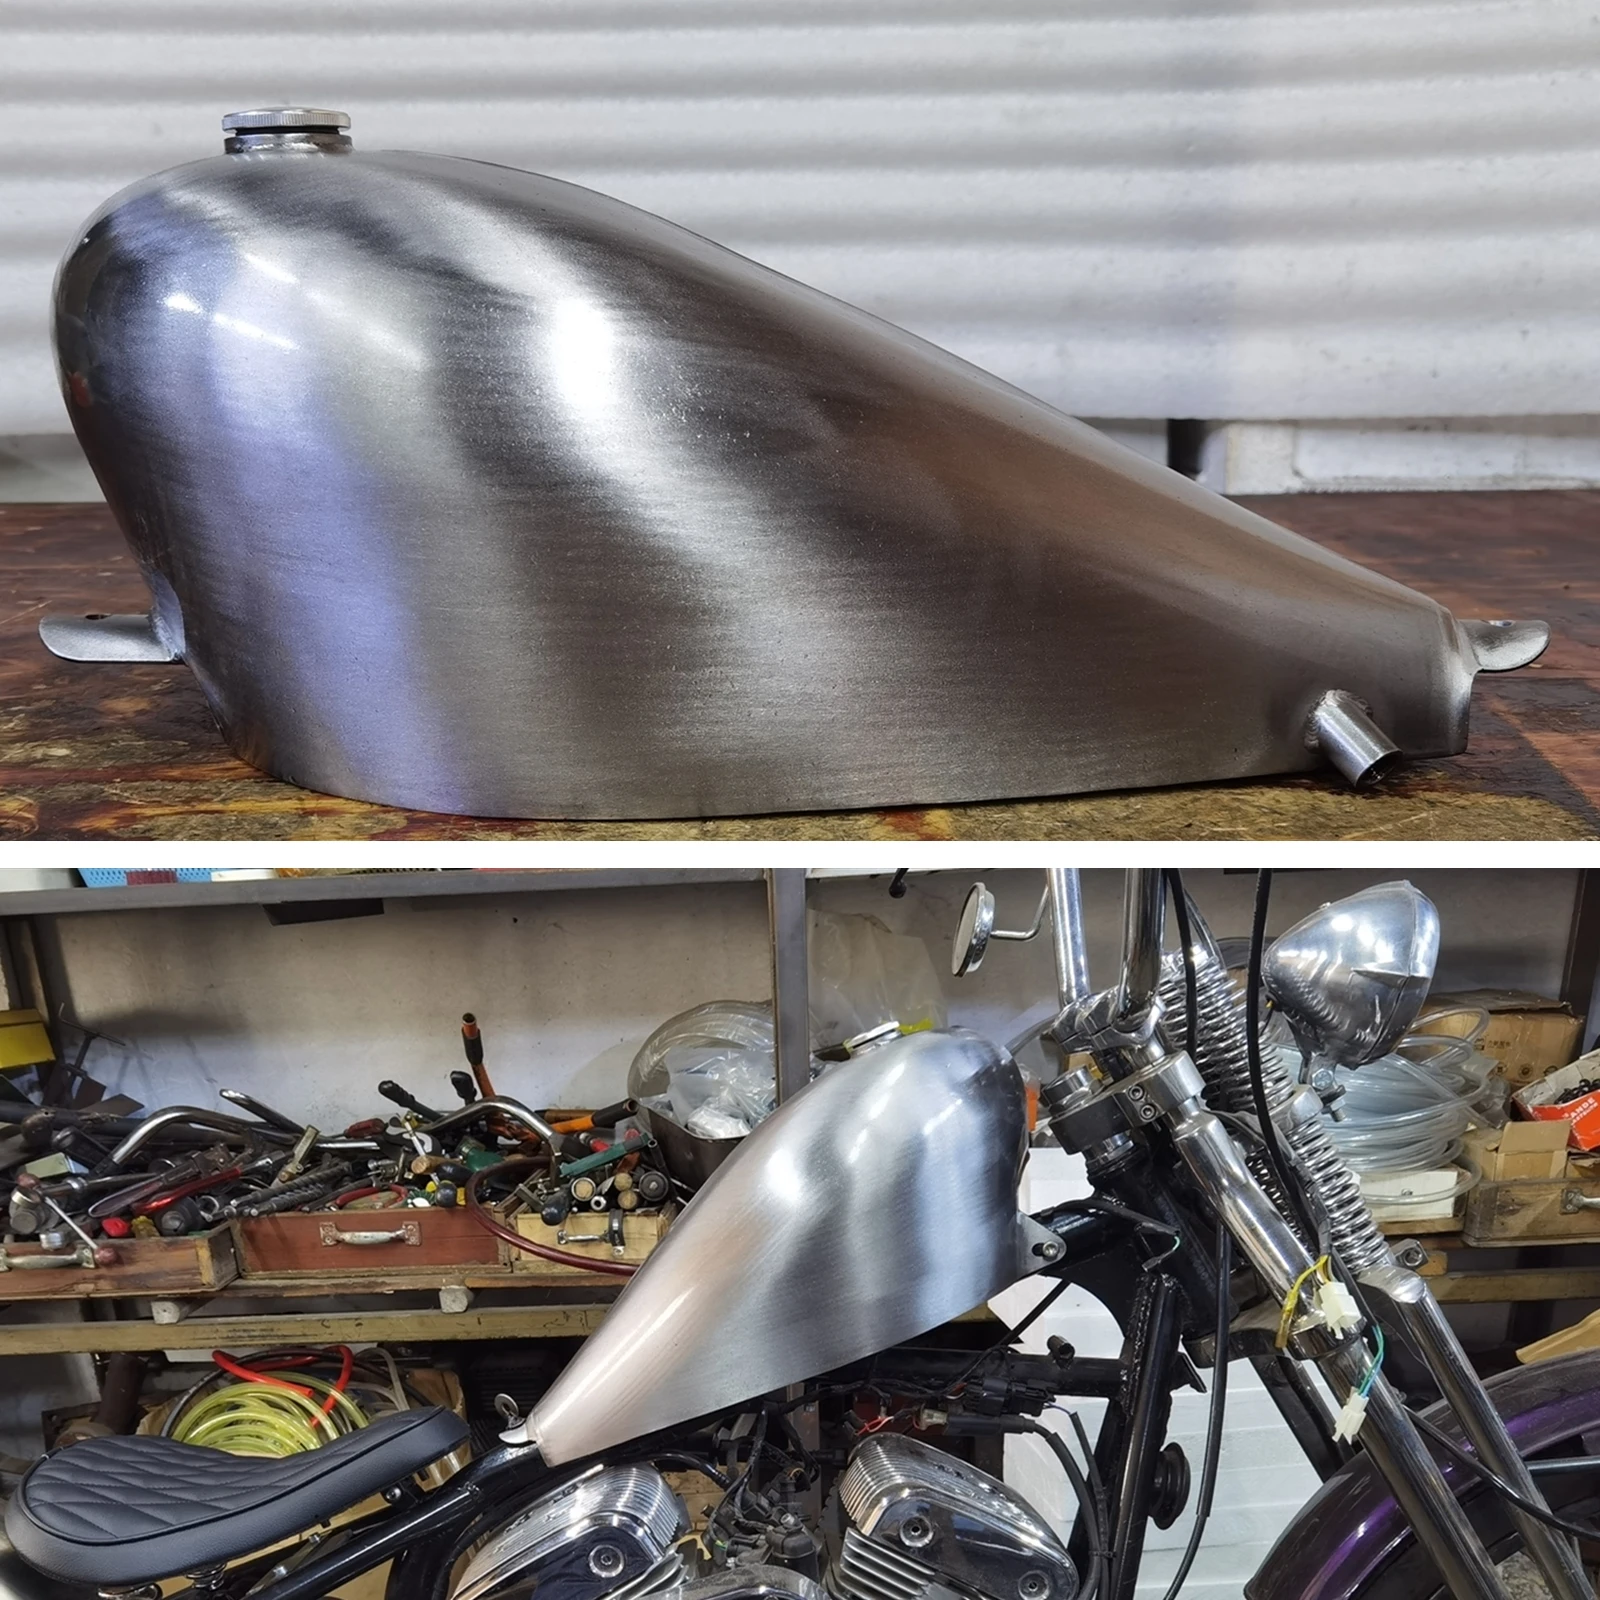 

Universal 9L Petrol Gas Oil Fuel Tank For All Motorcycle General Motorbike Handmade Modified Elding Fueling Can